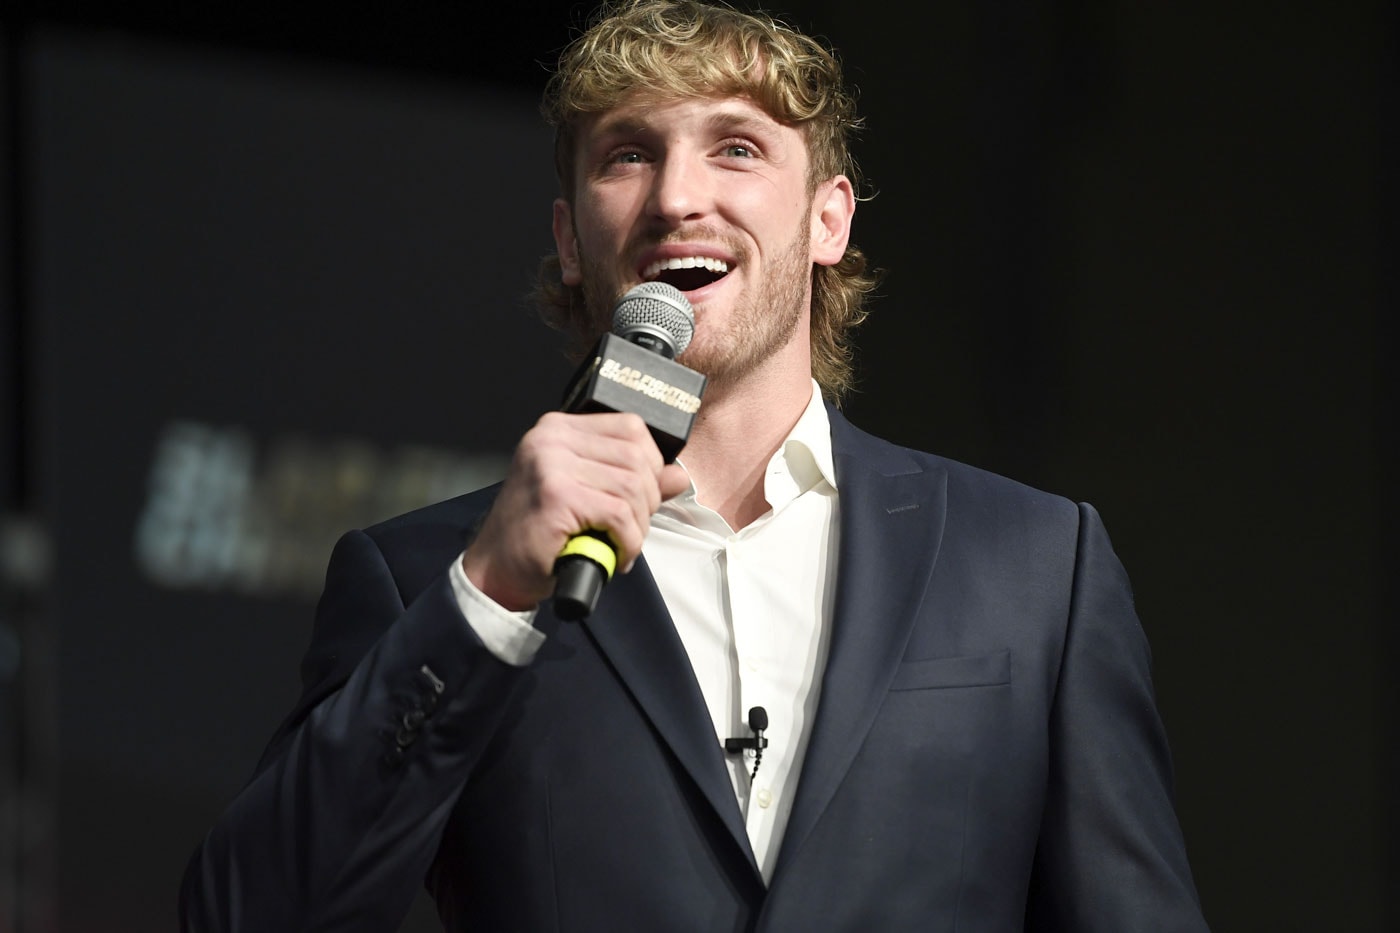 Logan Paul's New Company "Liquid Marketplace" Allows People To Invest in Shares of Rare Collectibles nft art trade buy sell blockchain cryptocurrency ethereum pokemon card giannis antetokonmpo stephen curry michael jordan lebron james trading card cryptopunk nft